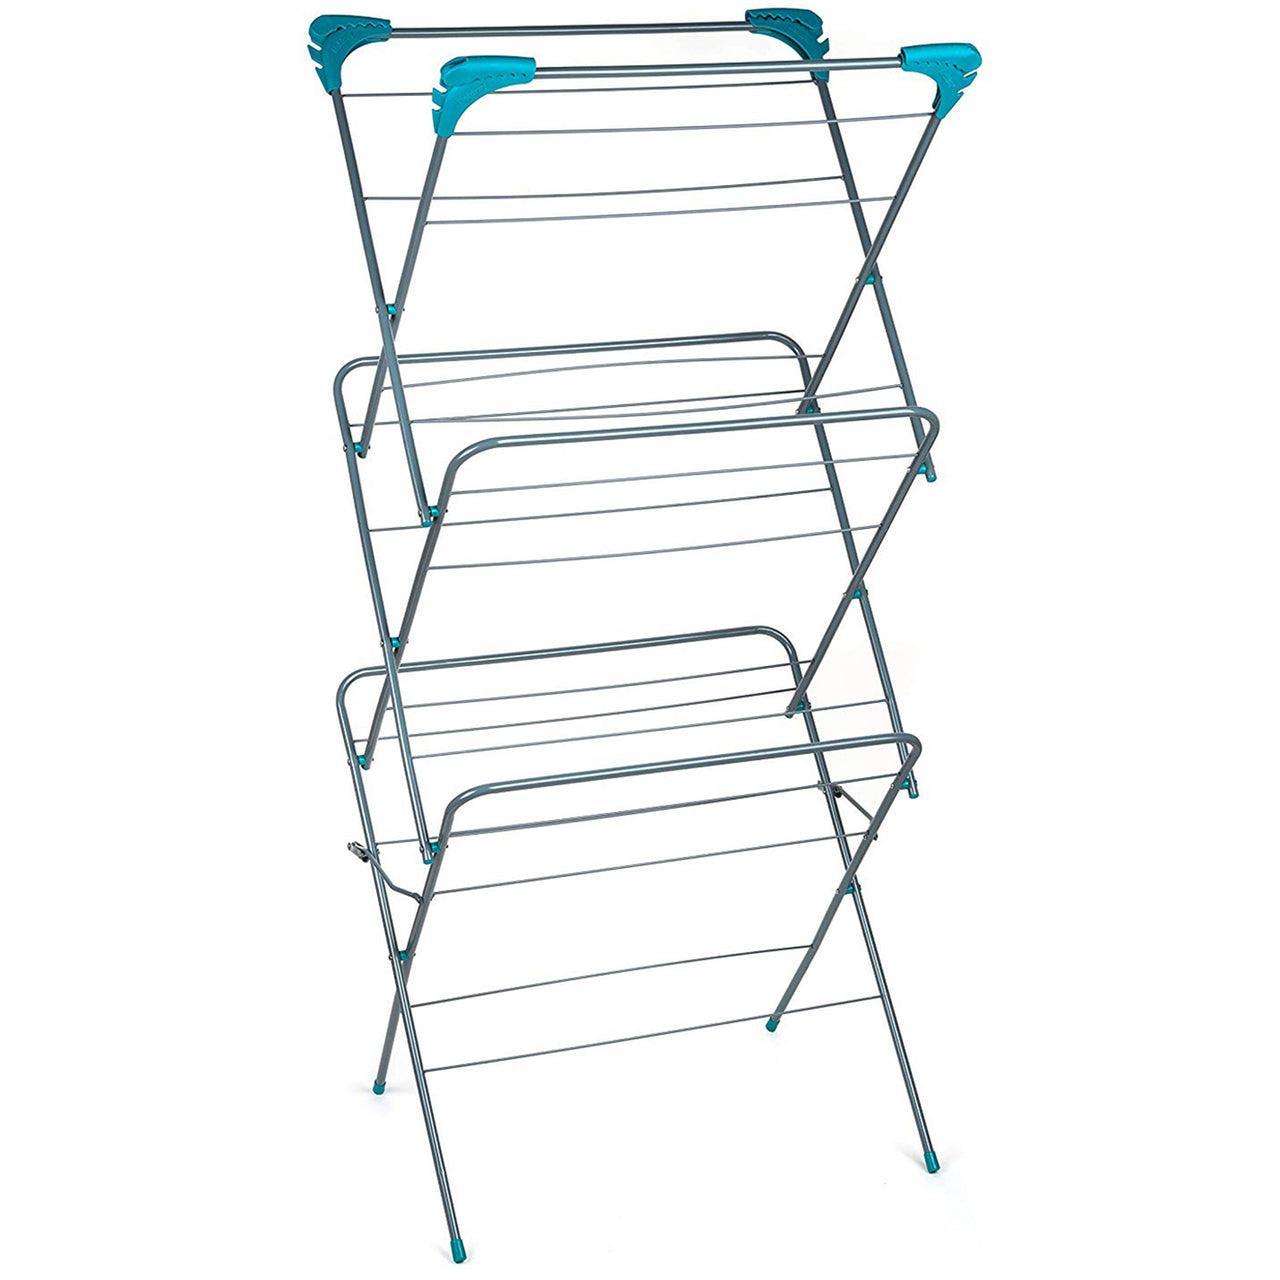 Beldray 3 Tier Elegant Clothes Horse Laundry Airer | 15m Drying Space - Choice Stores